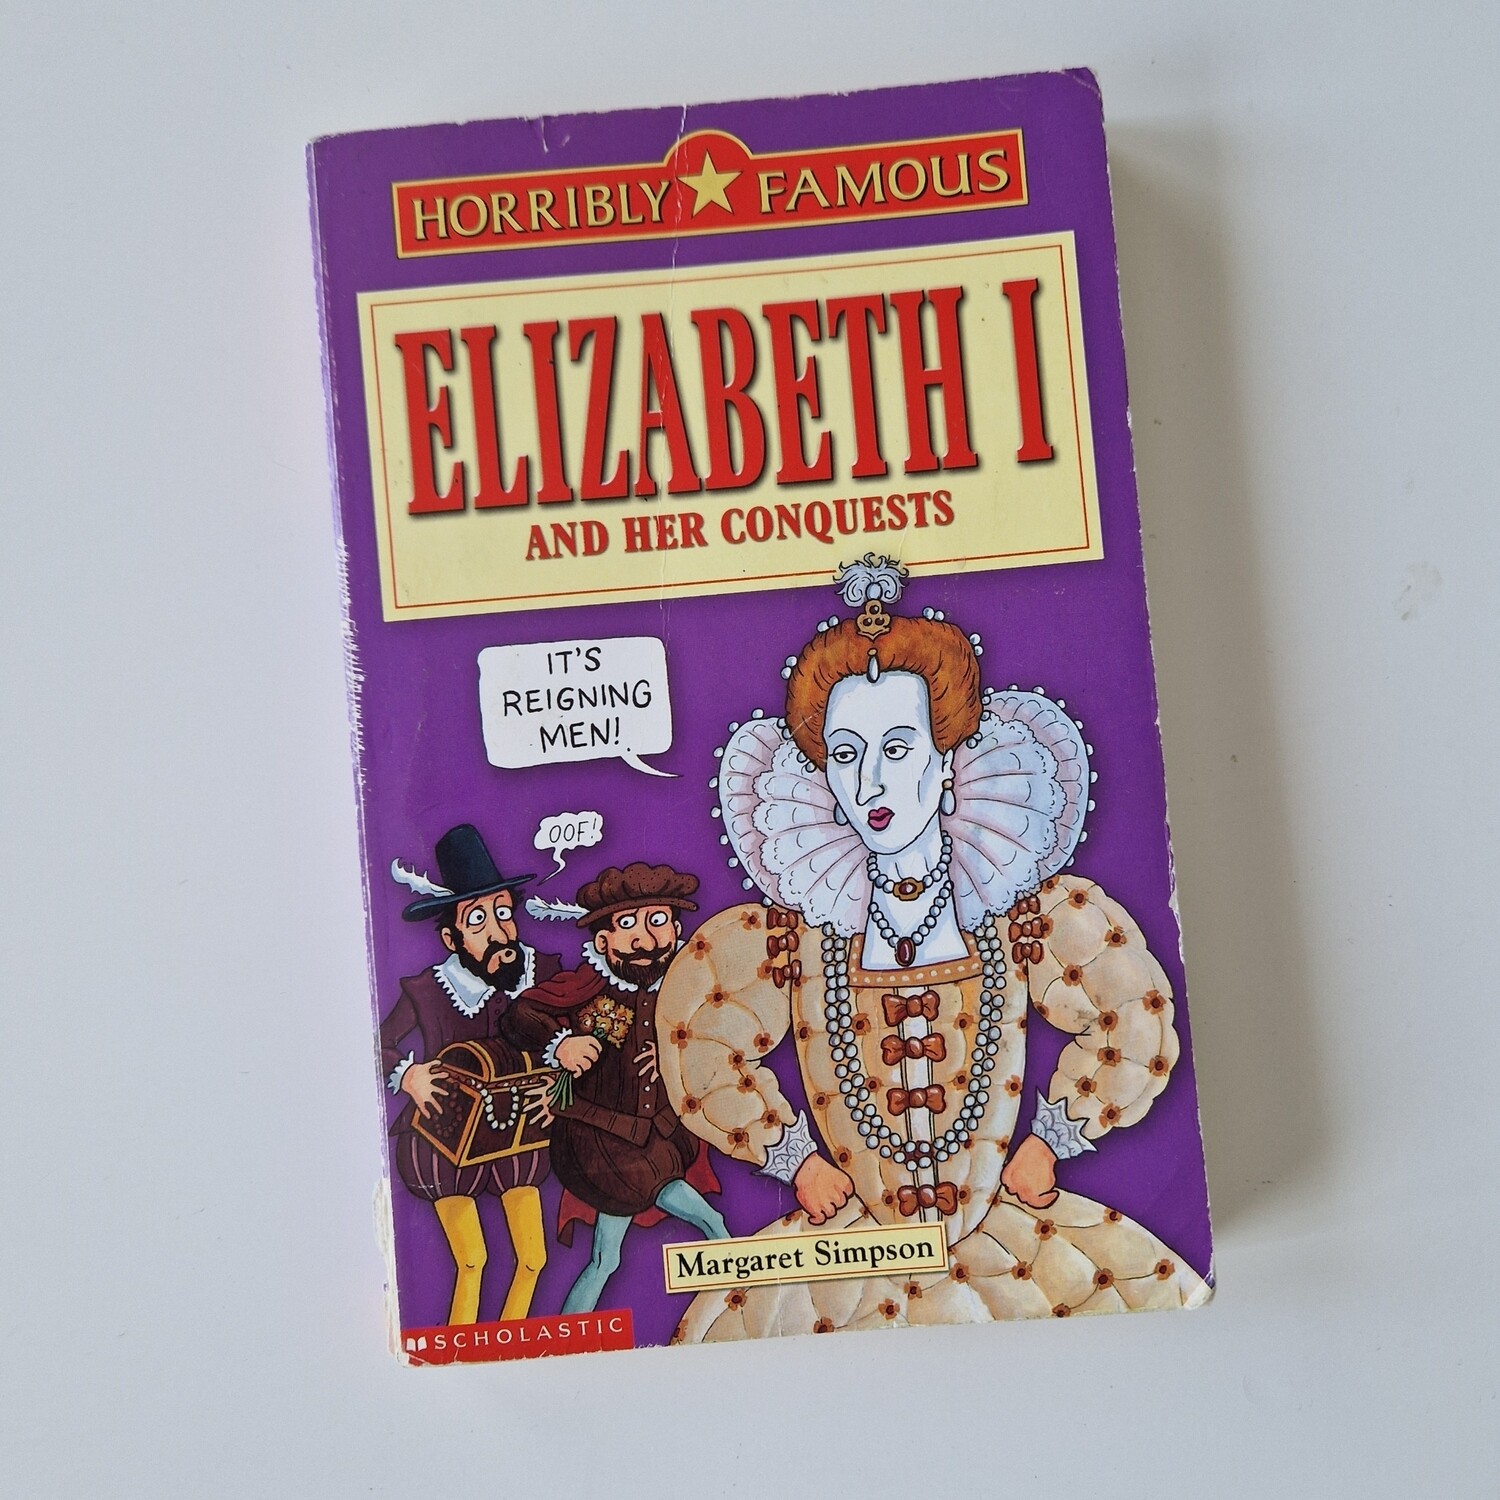 Queen Elizabeth I - Horribly Famous Notebook - made from a paperback book